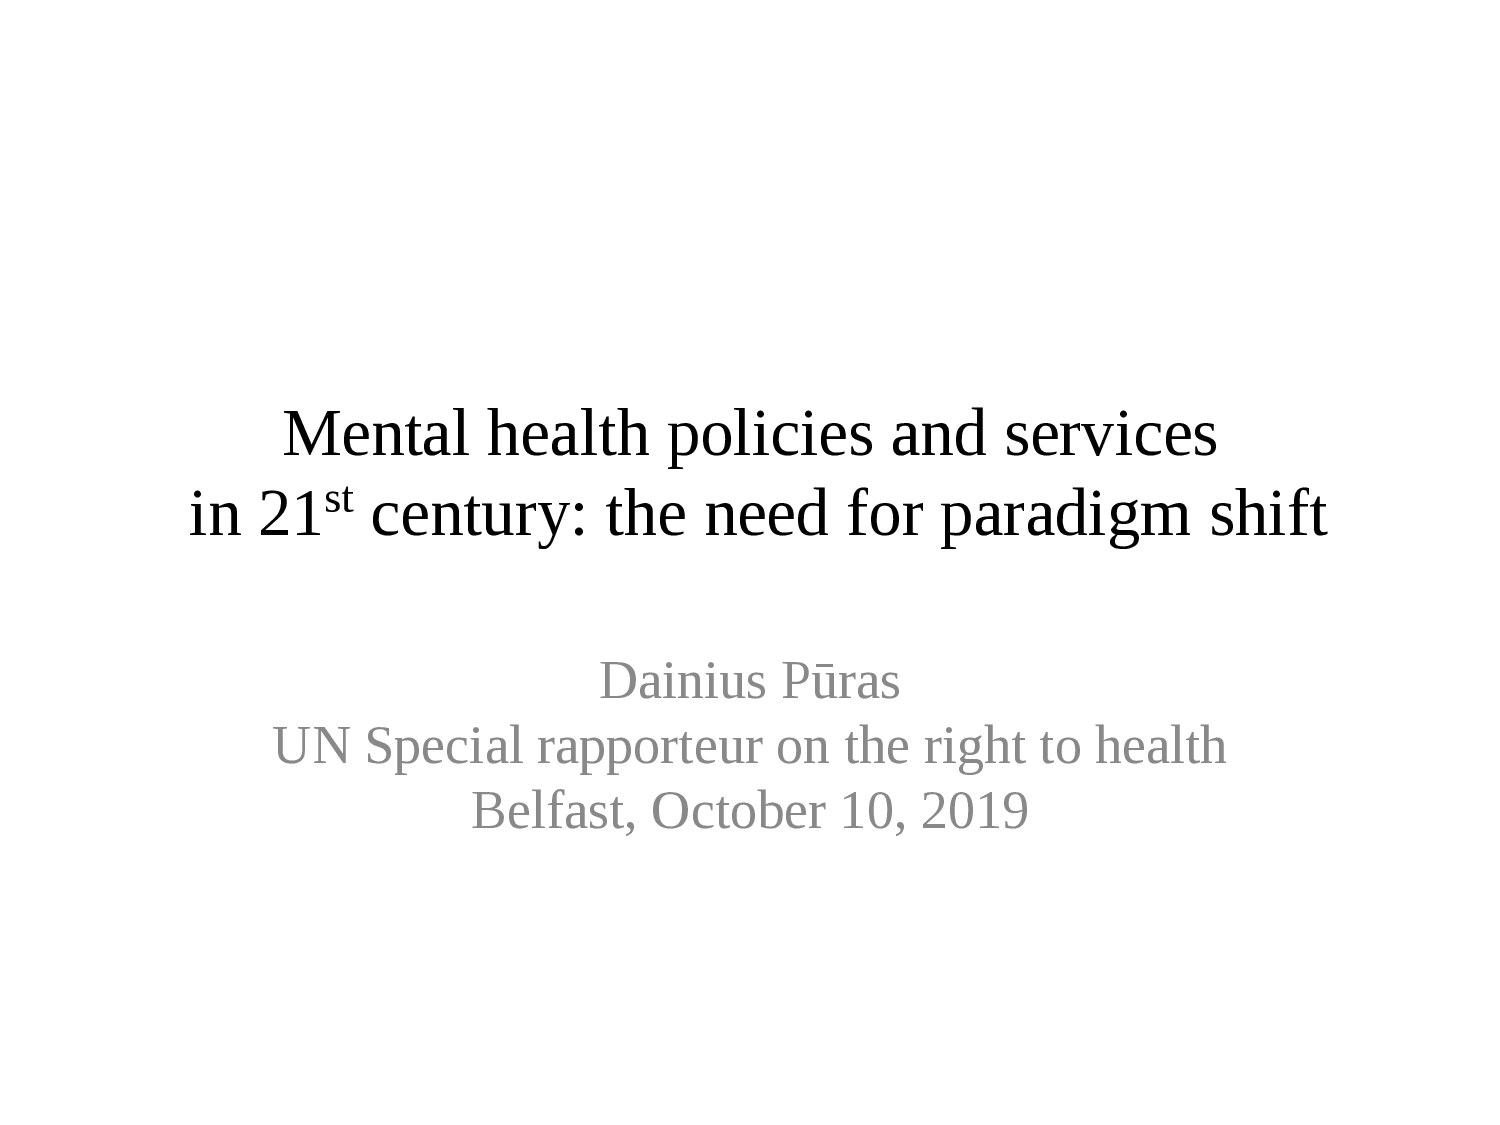 Mental health policies and services in 21st century: the need for paradigm shift